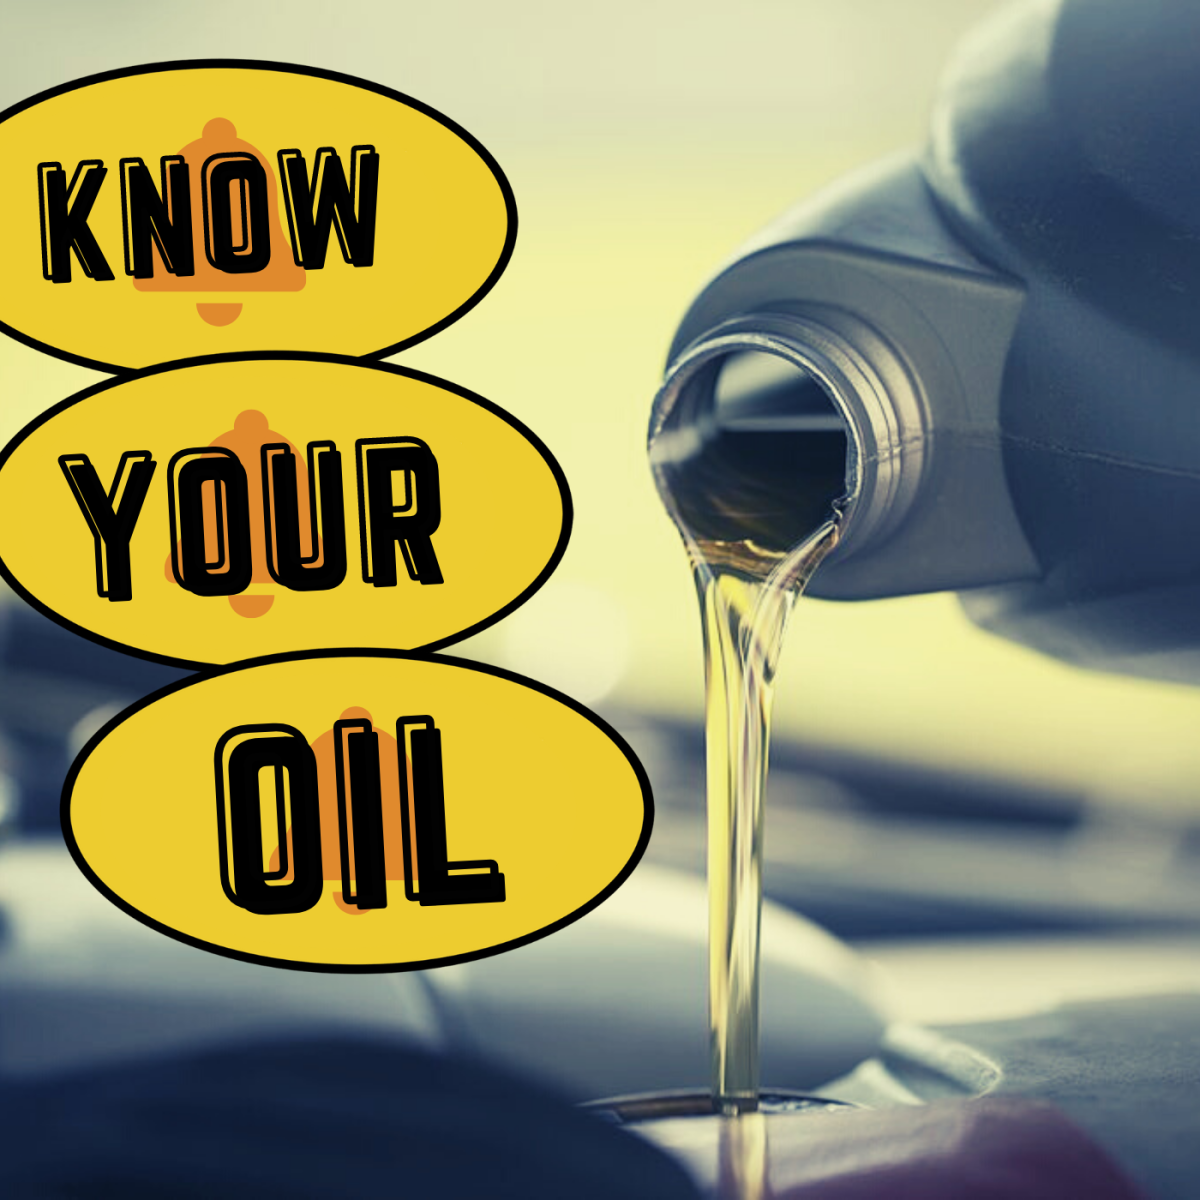 Car Oil Differences: Viscosity, Grade, Type, and Usage